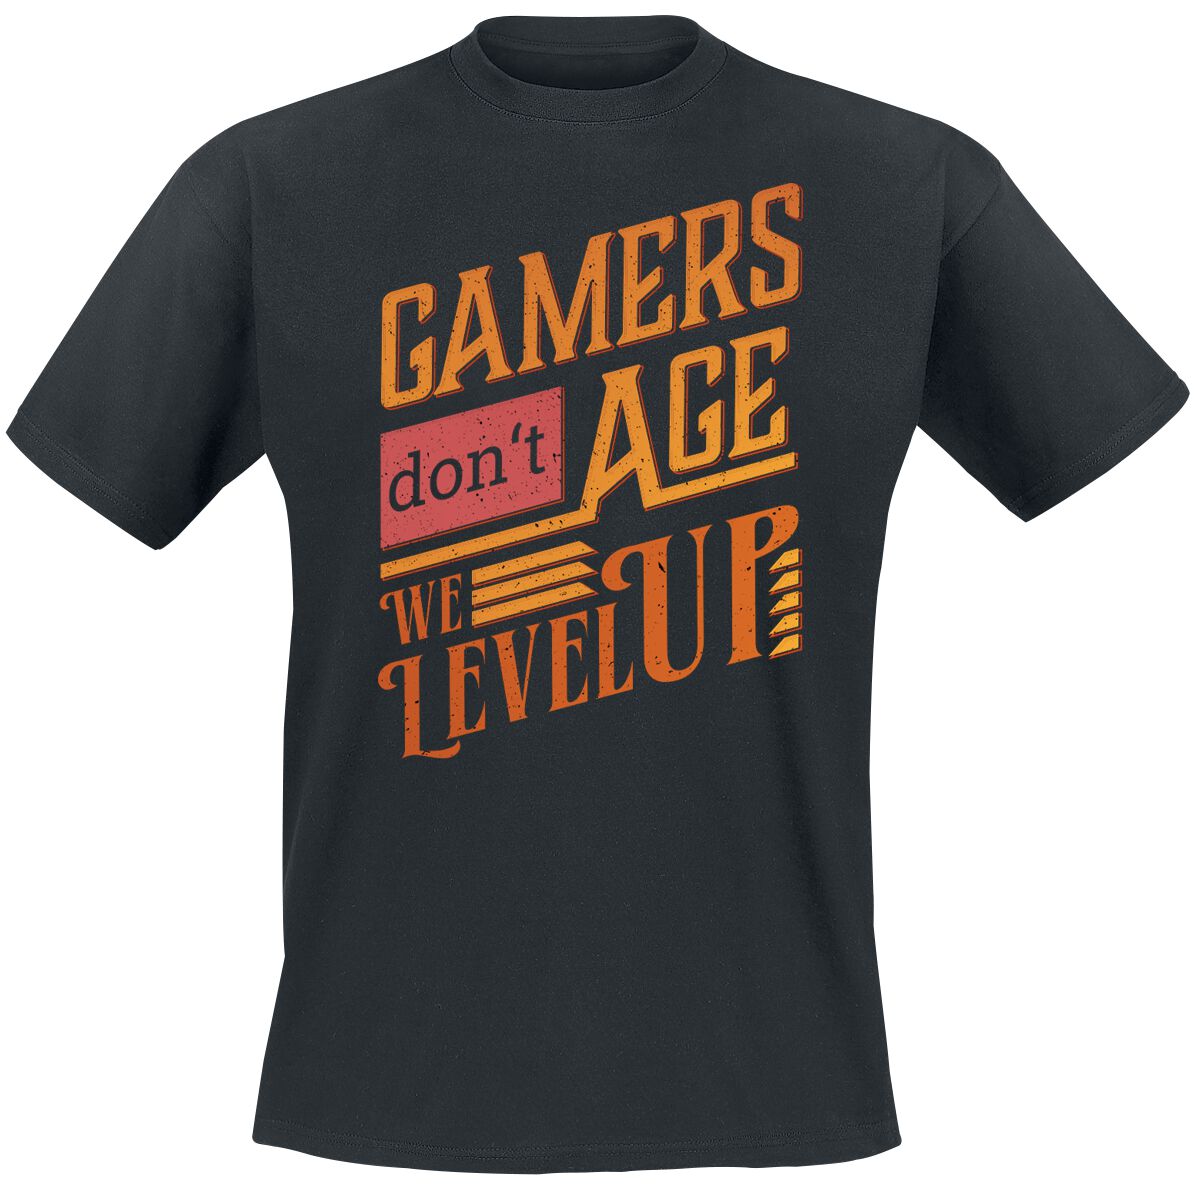 Gamers Don't Age - We Level Up  T-Shirt black